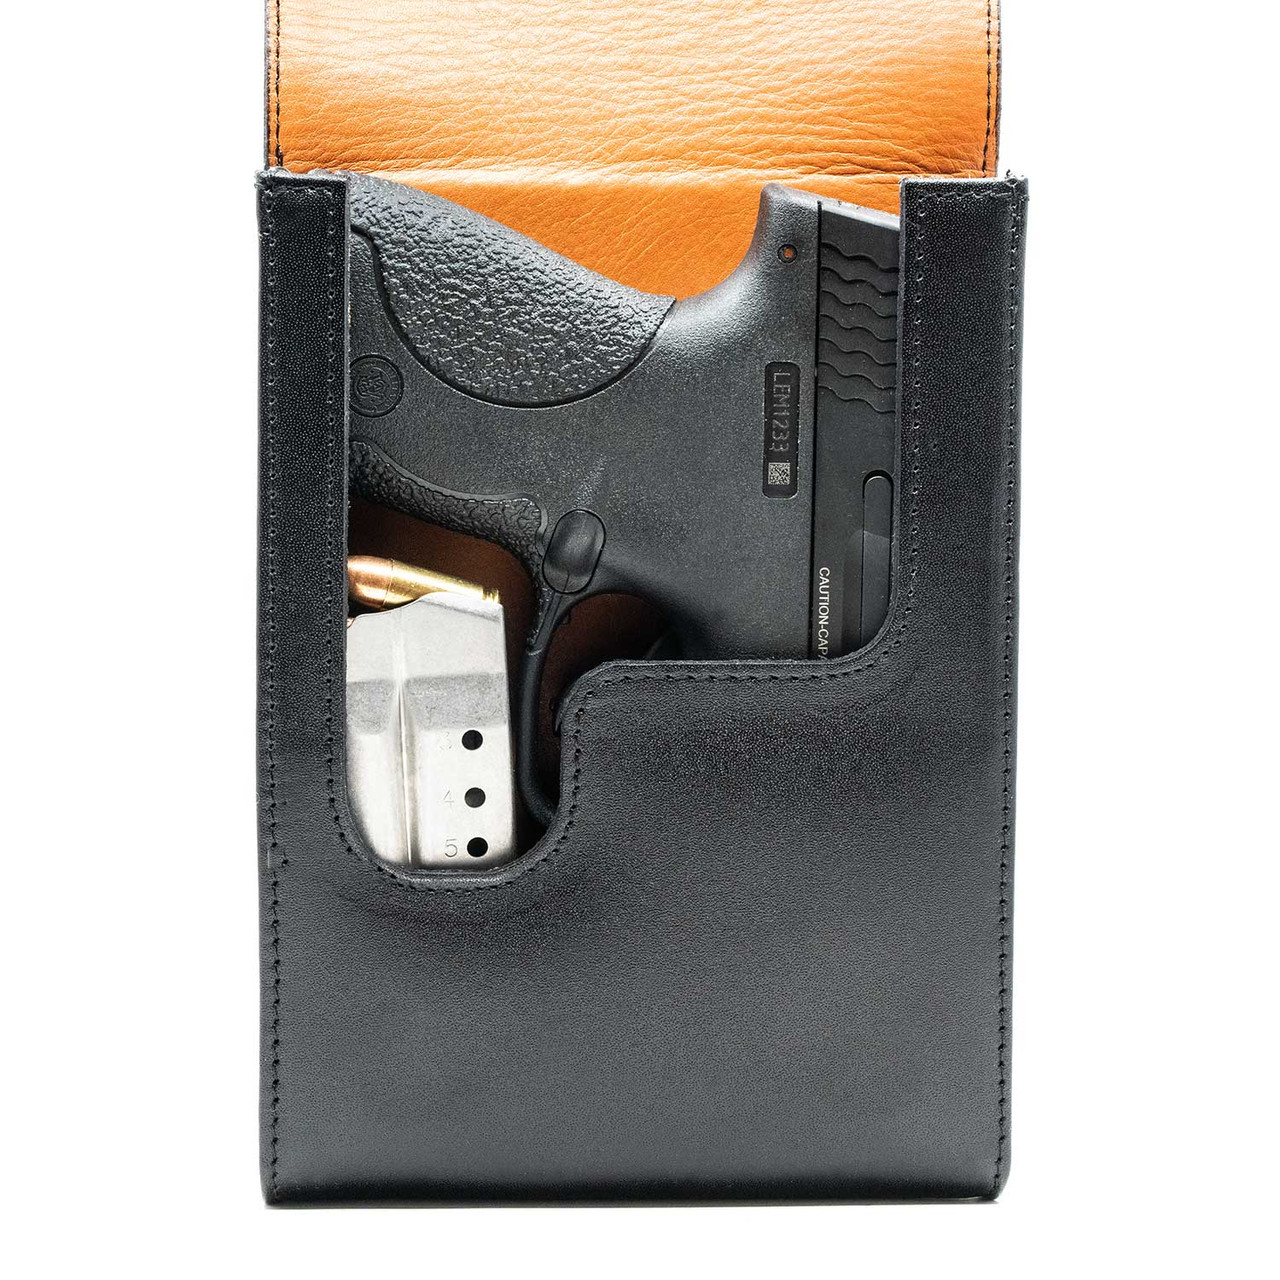 The CZ 2075 Rami Xtra Mag Black Leather Holster